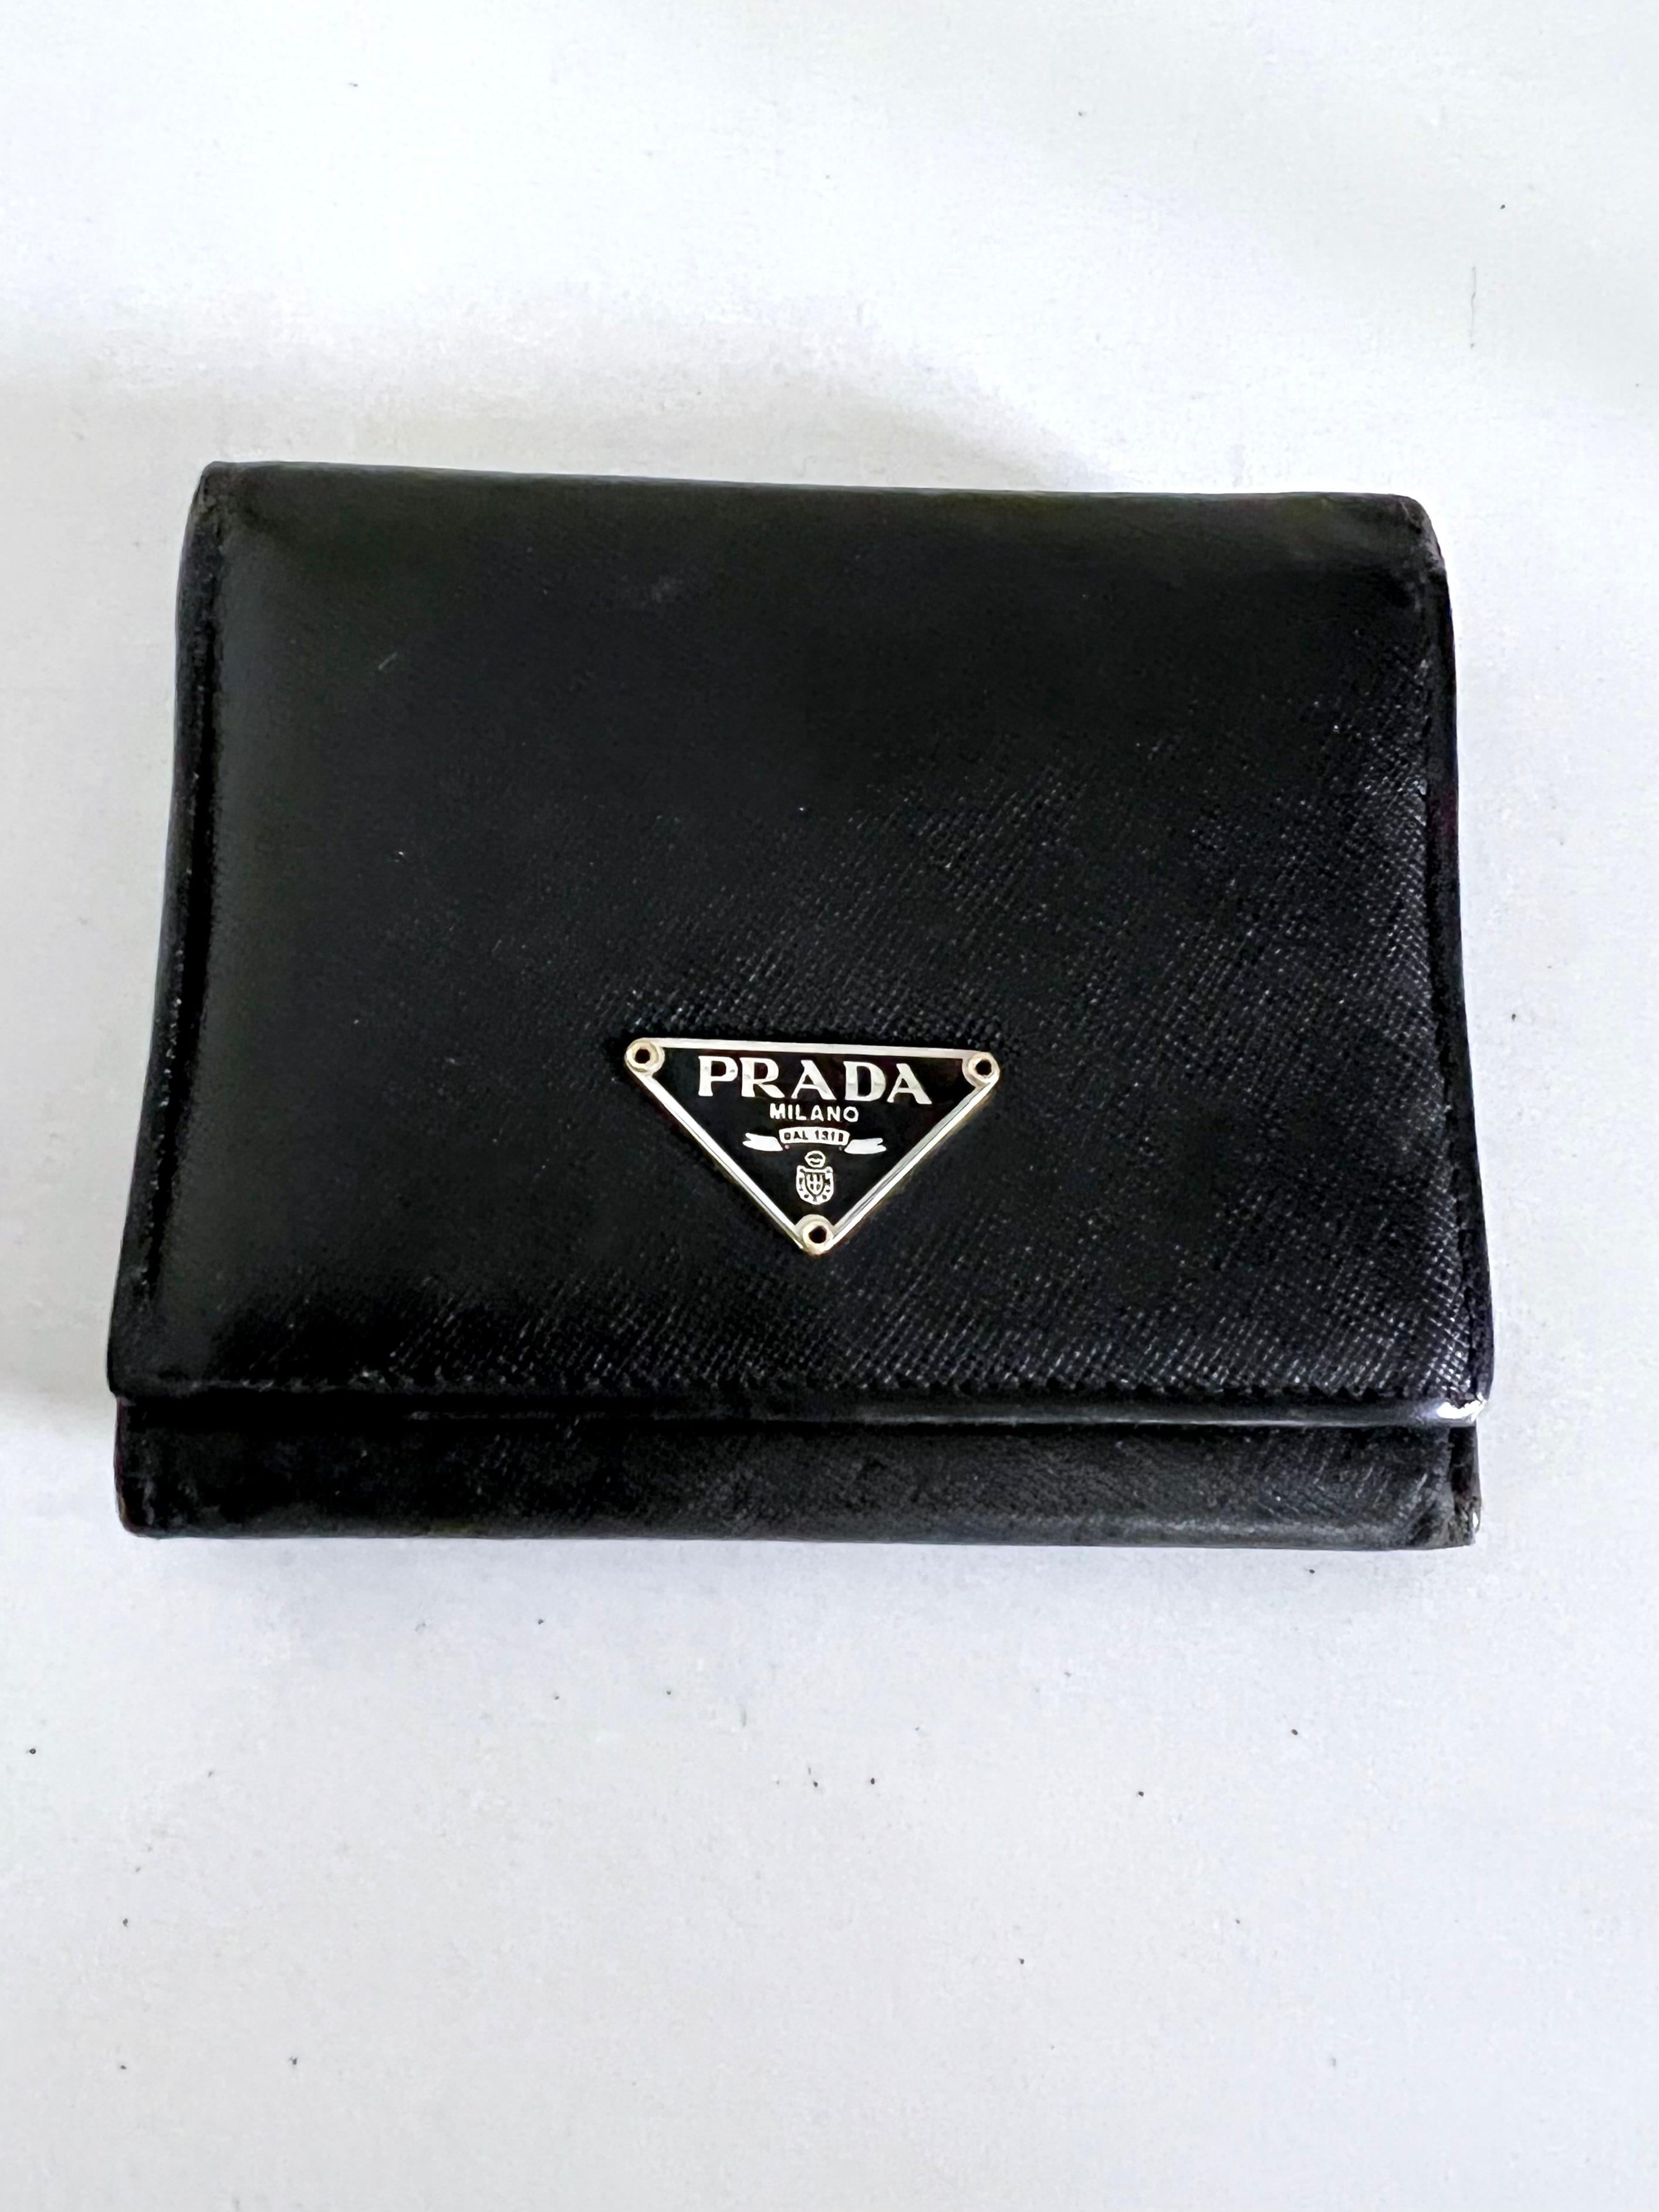 Prada Unisex Tri Fold Wallet with many Compartments In Good Condition For Sale In Los Angeles, CA